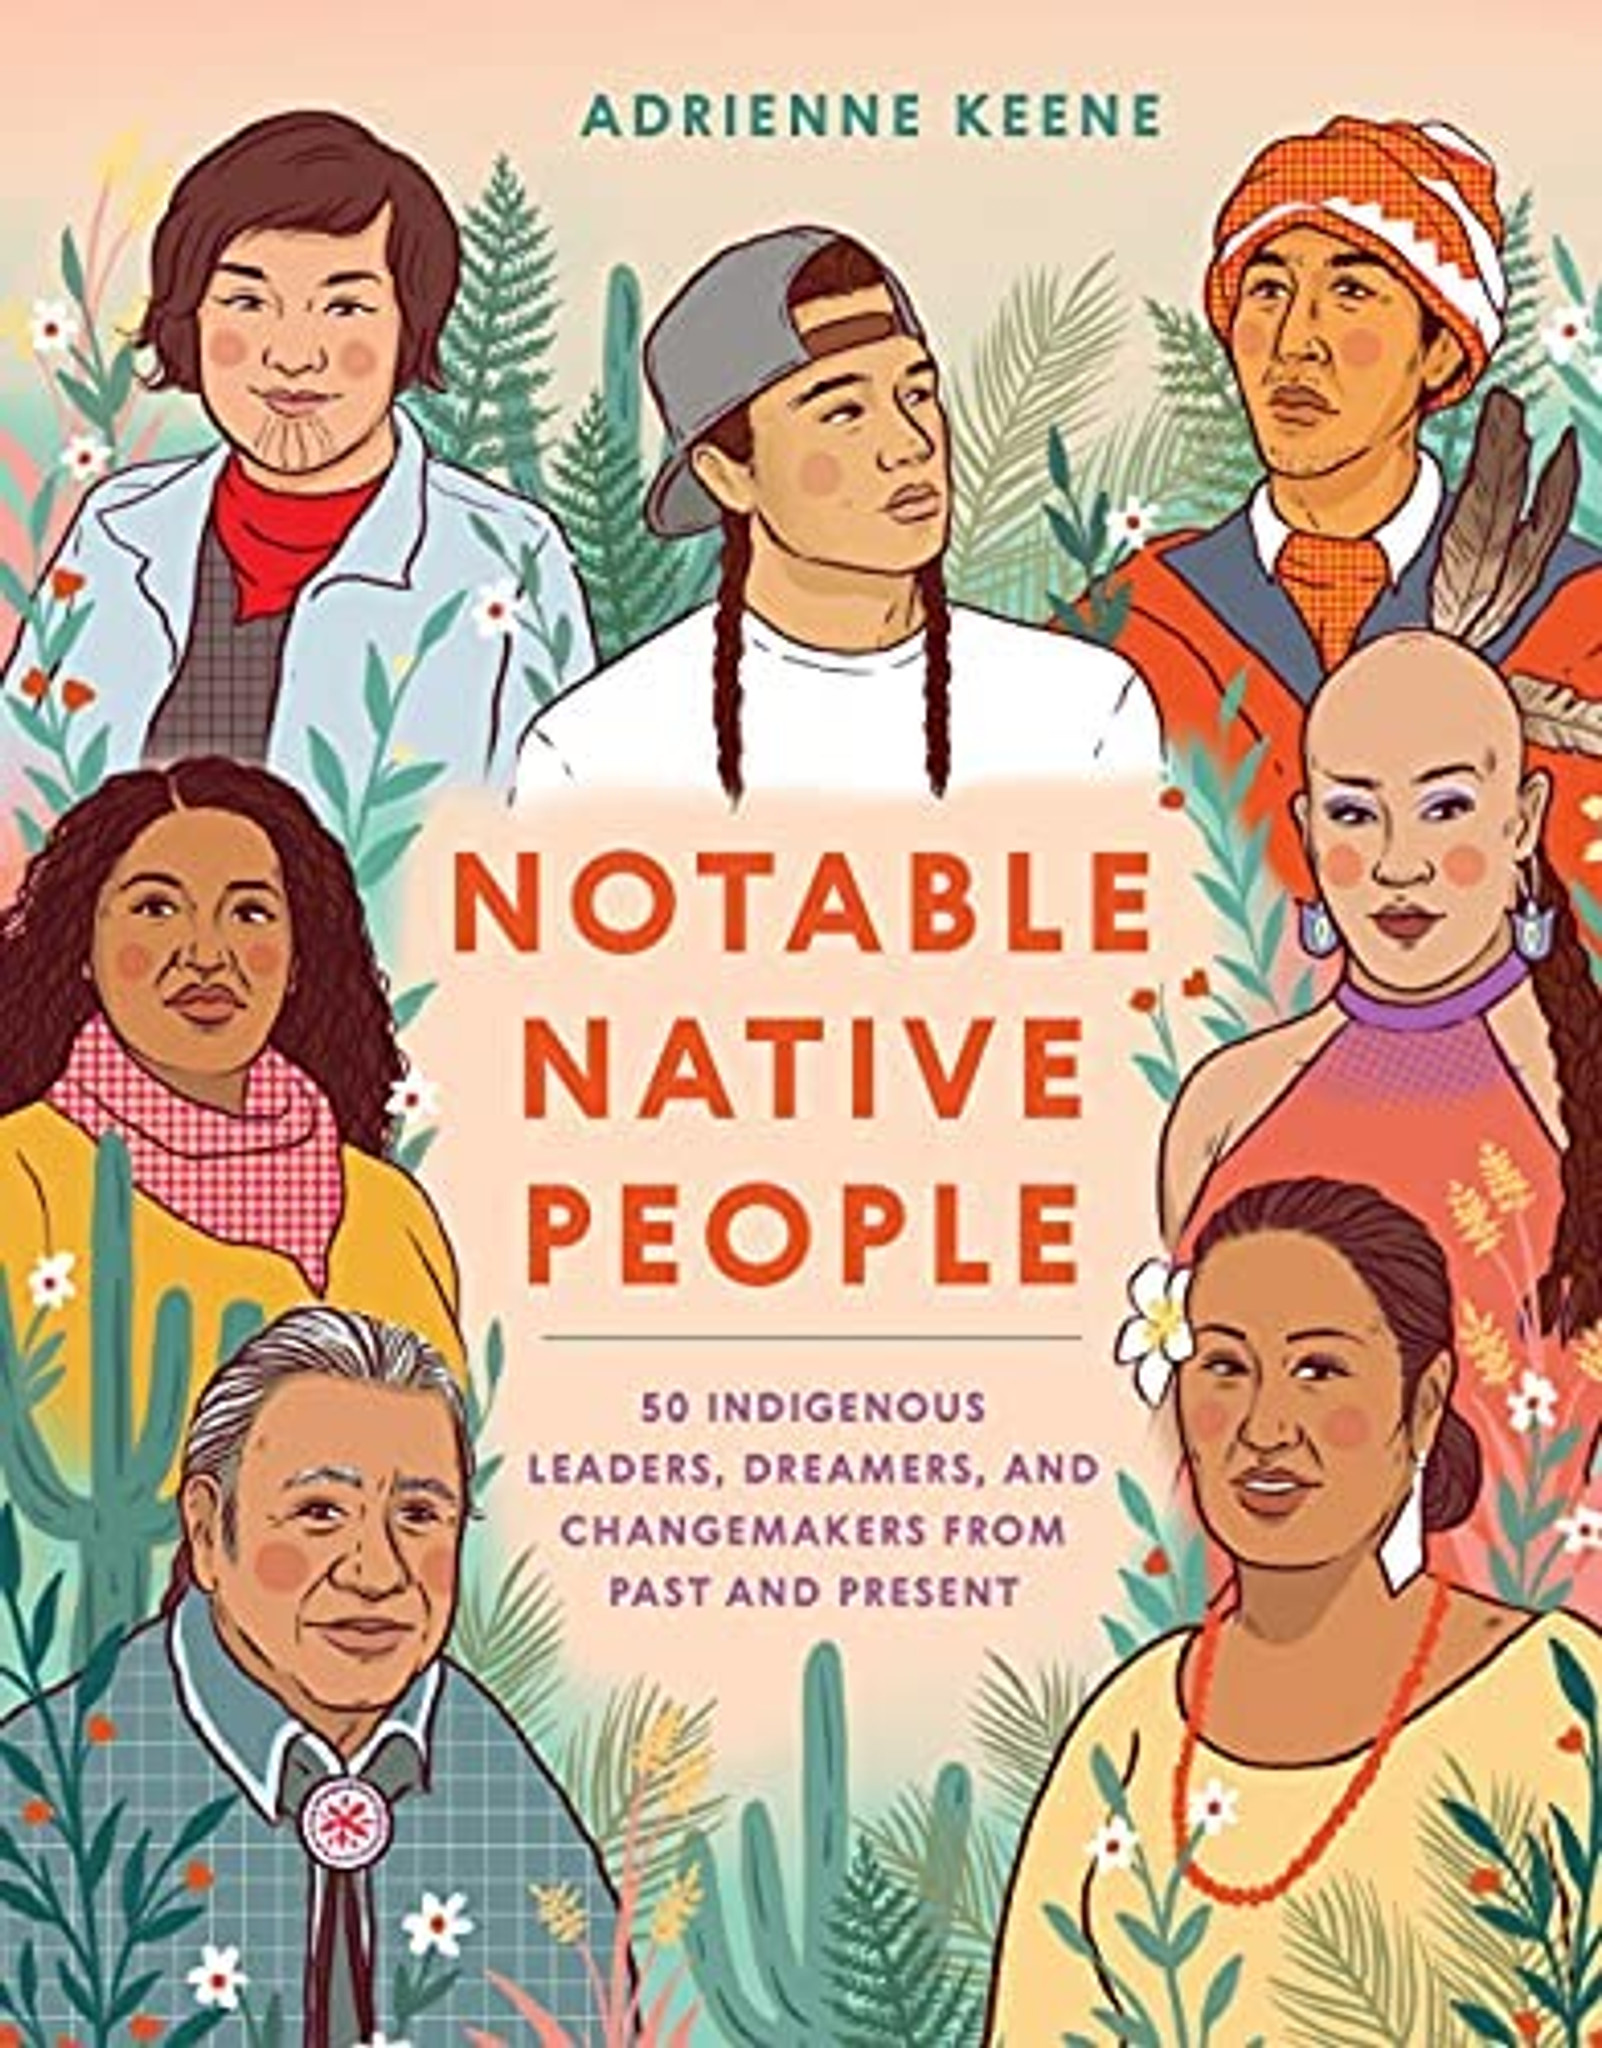 Cover of Notable Native People with drawn images of 7 Native individuals discussed in the book